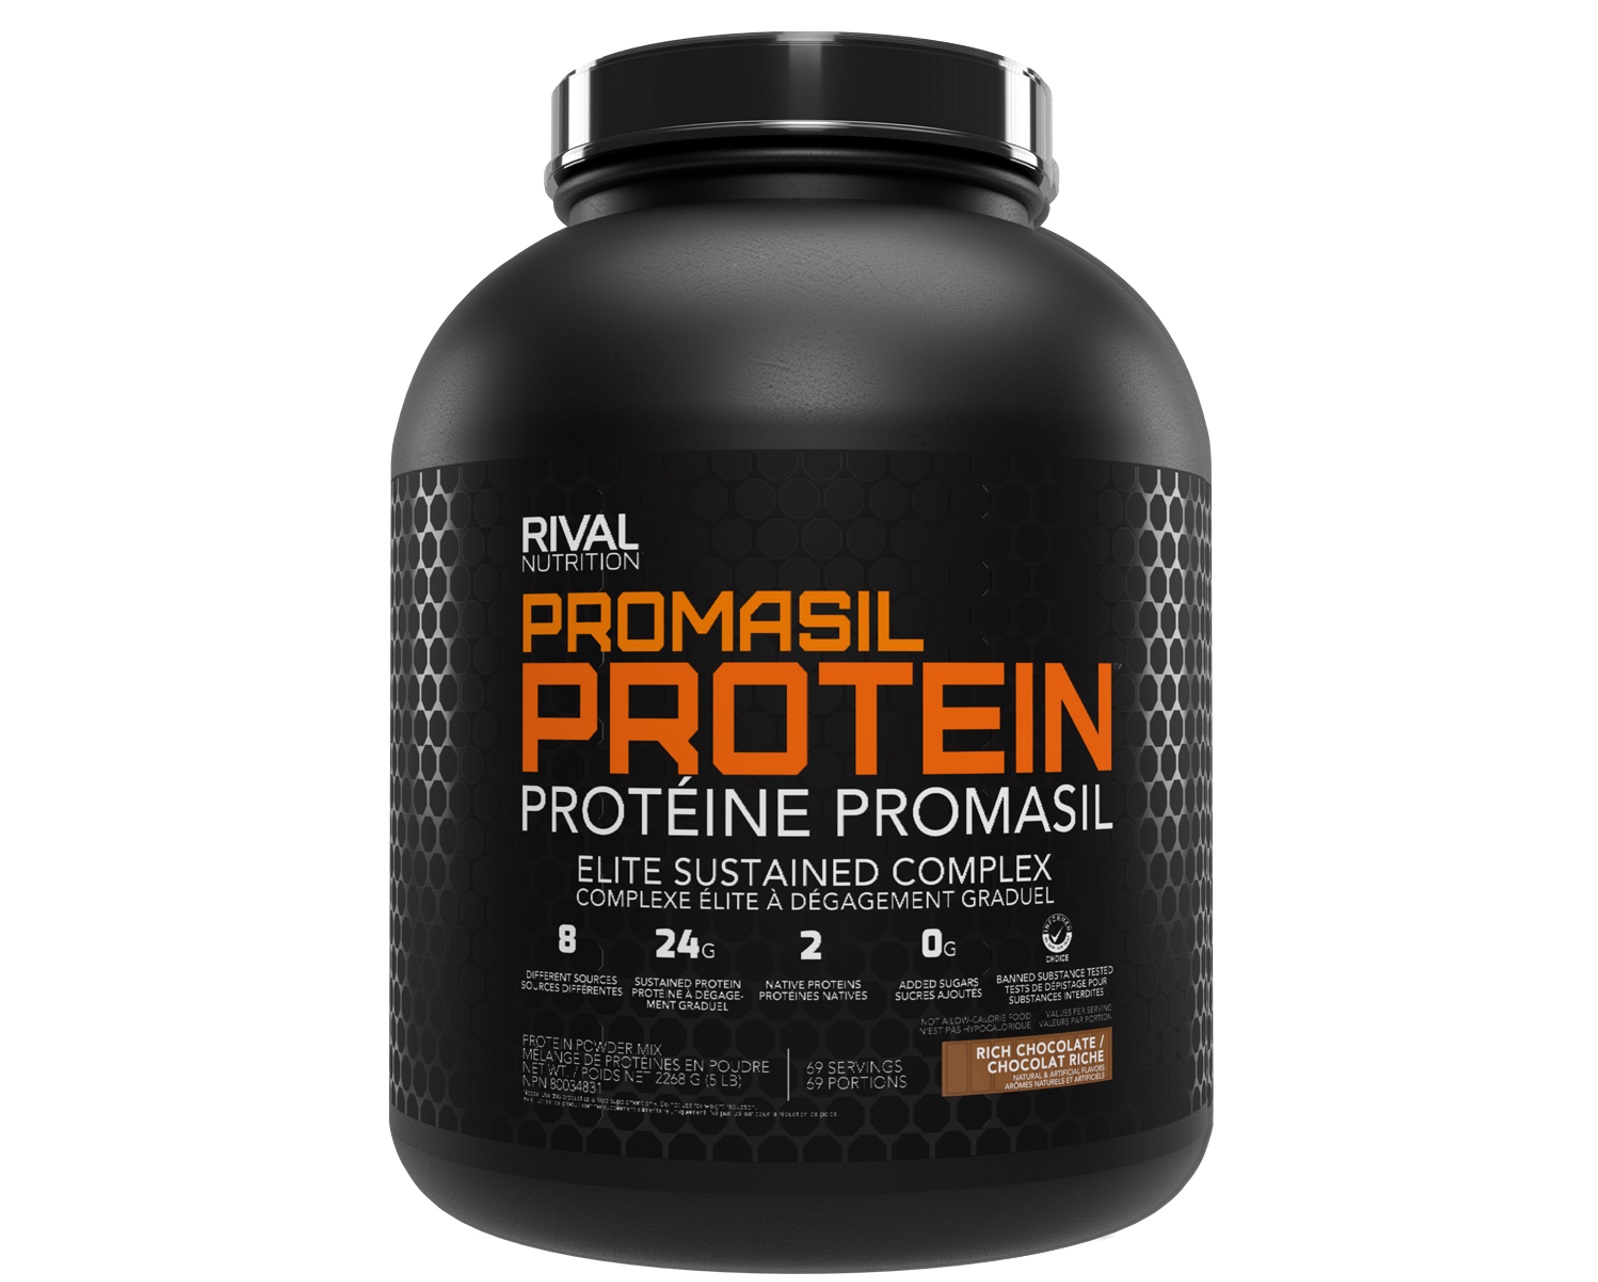 18-promasil-protein-nutrition-facts